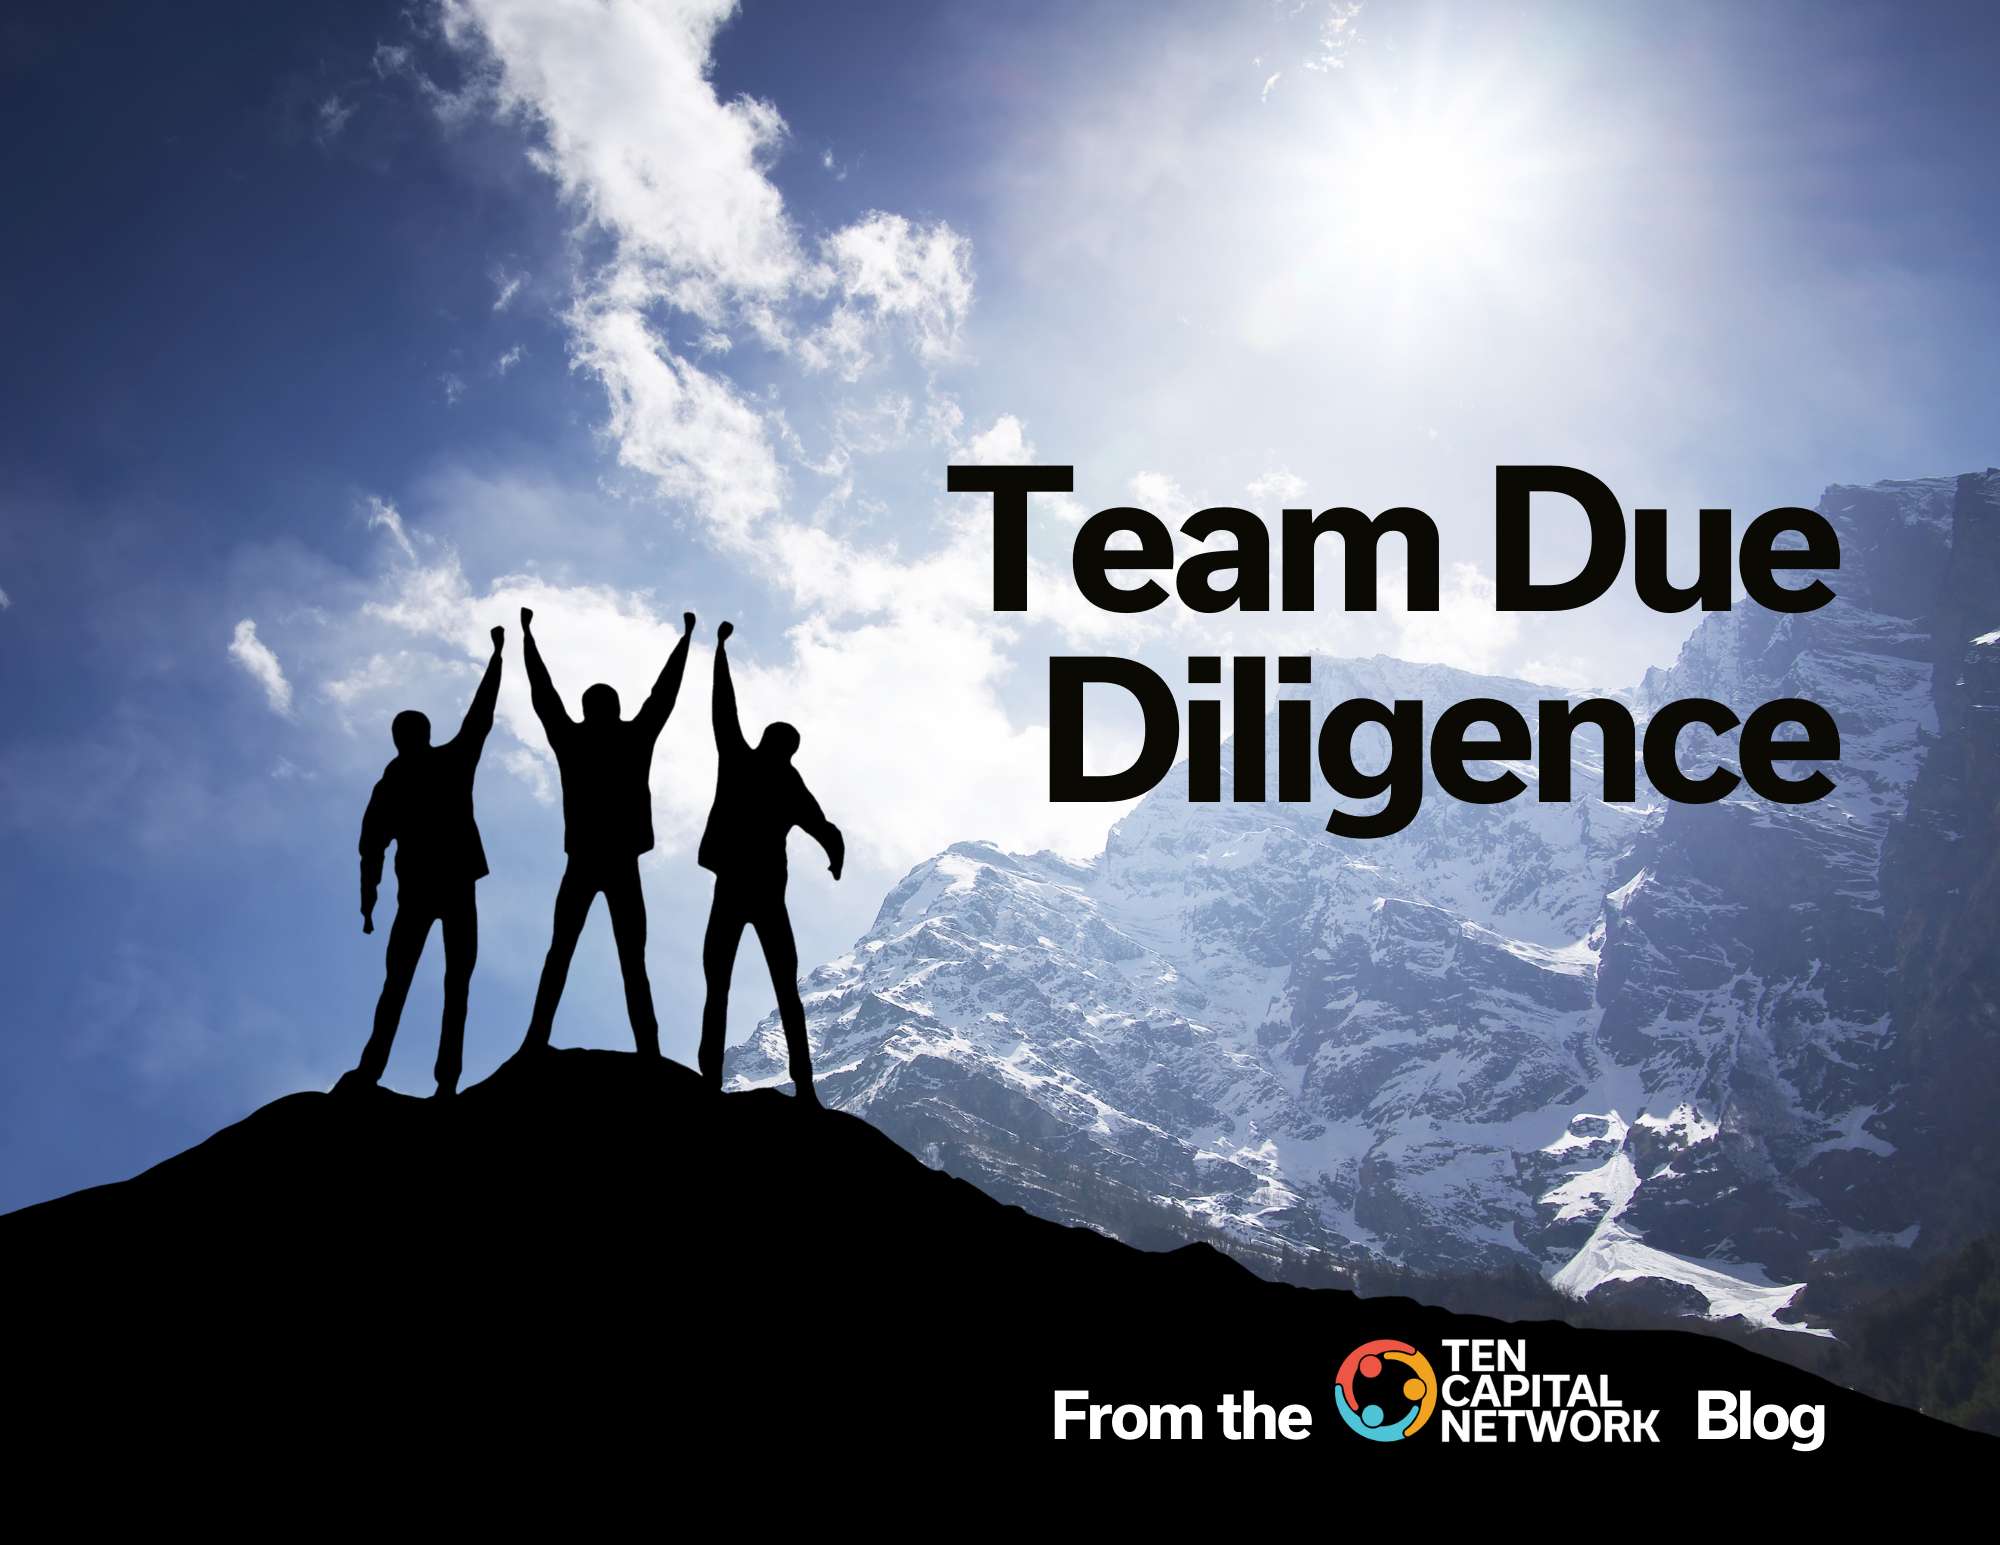 Team Due Diligence